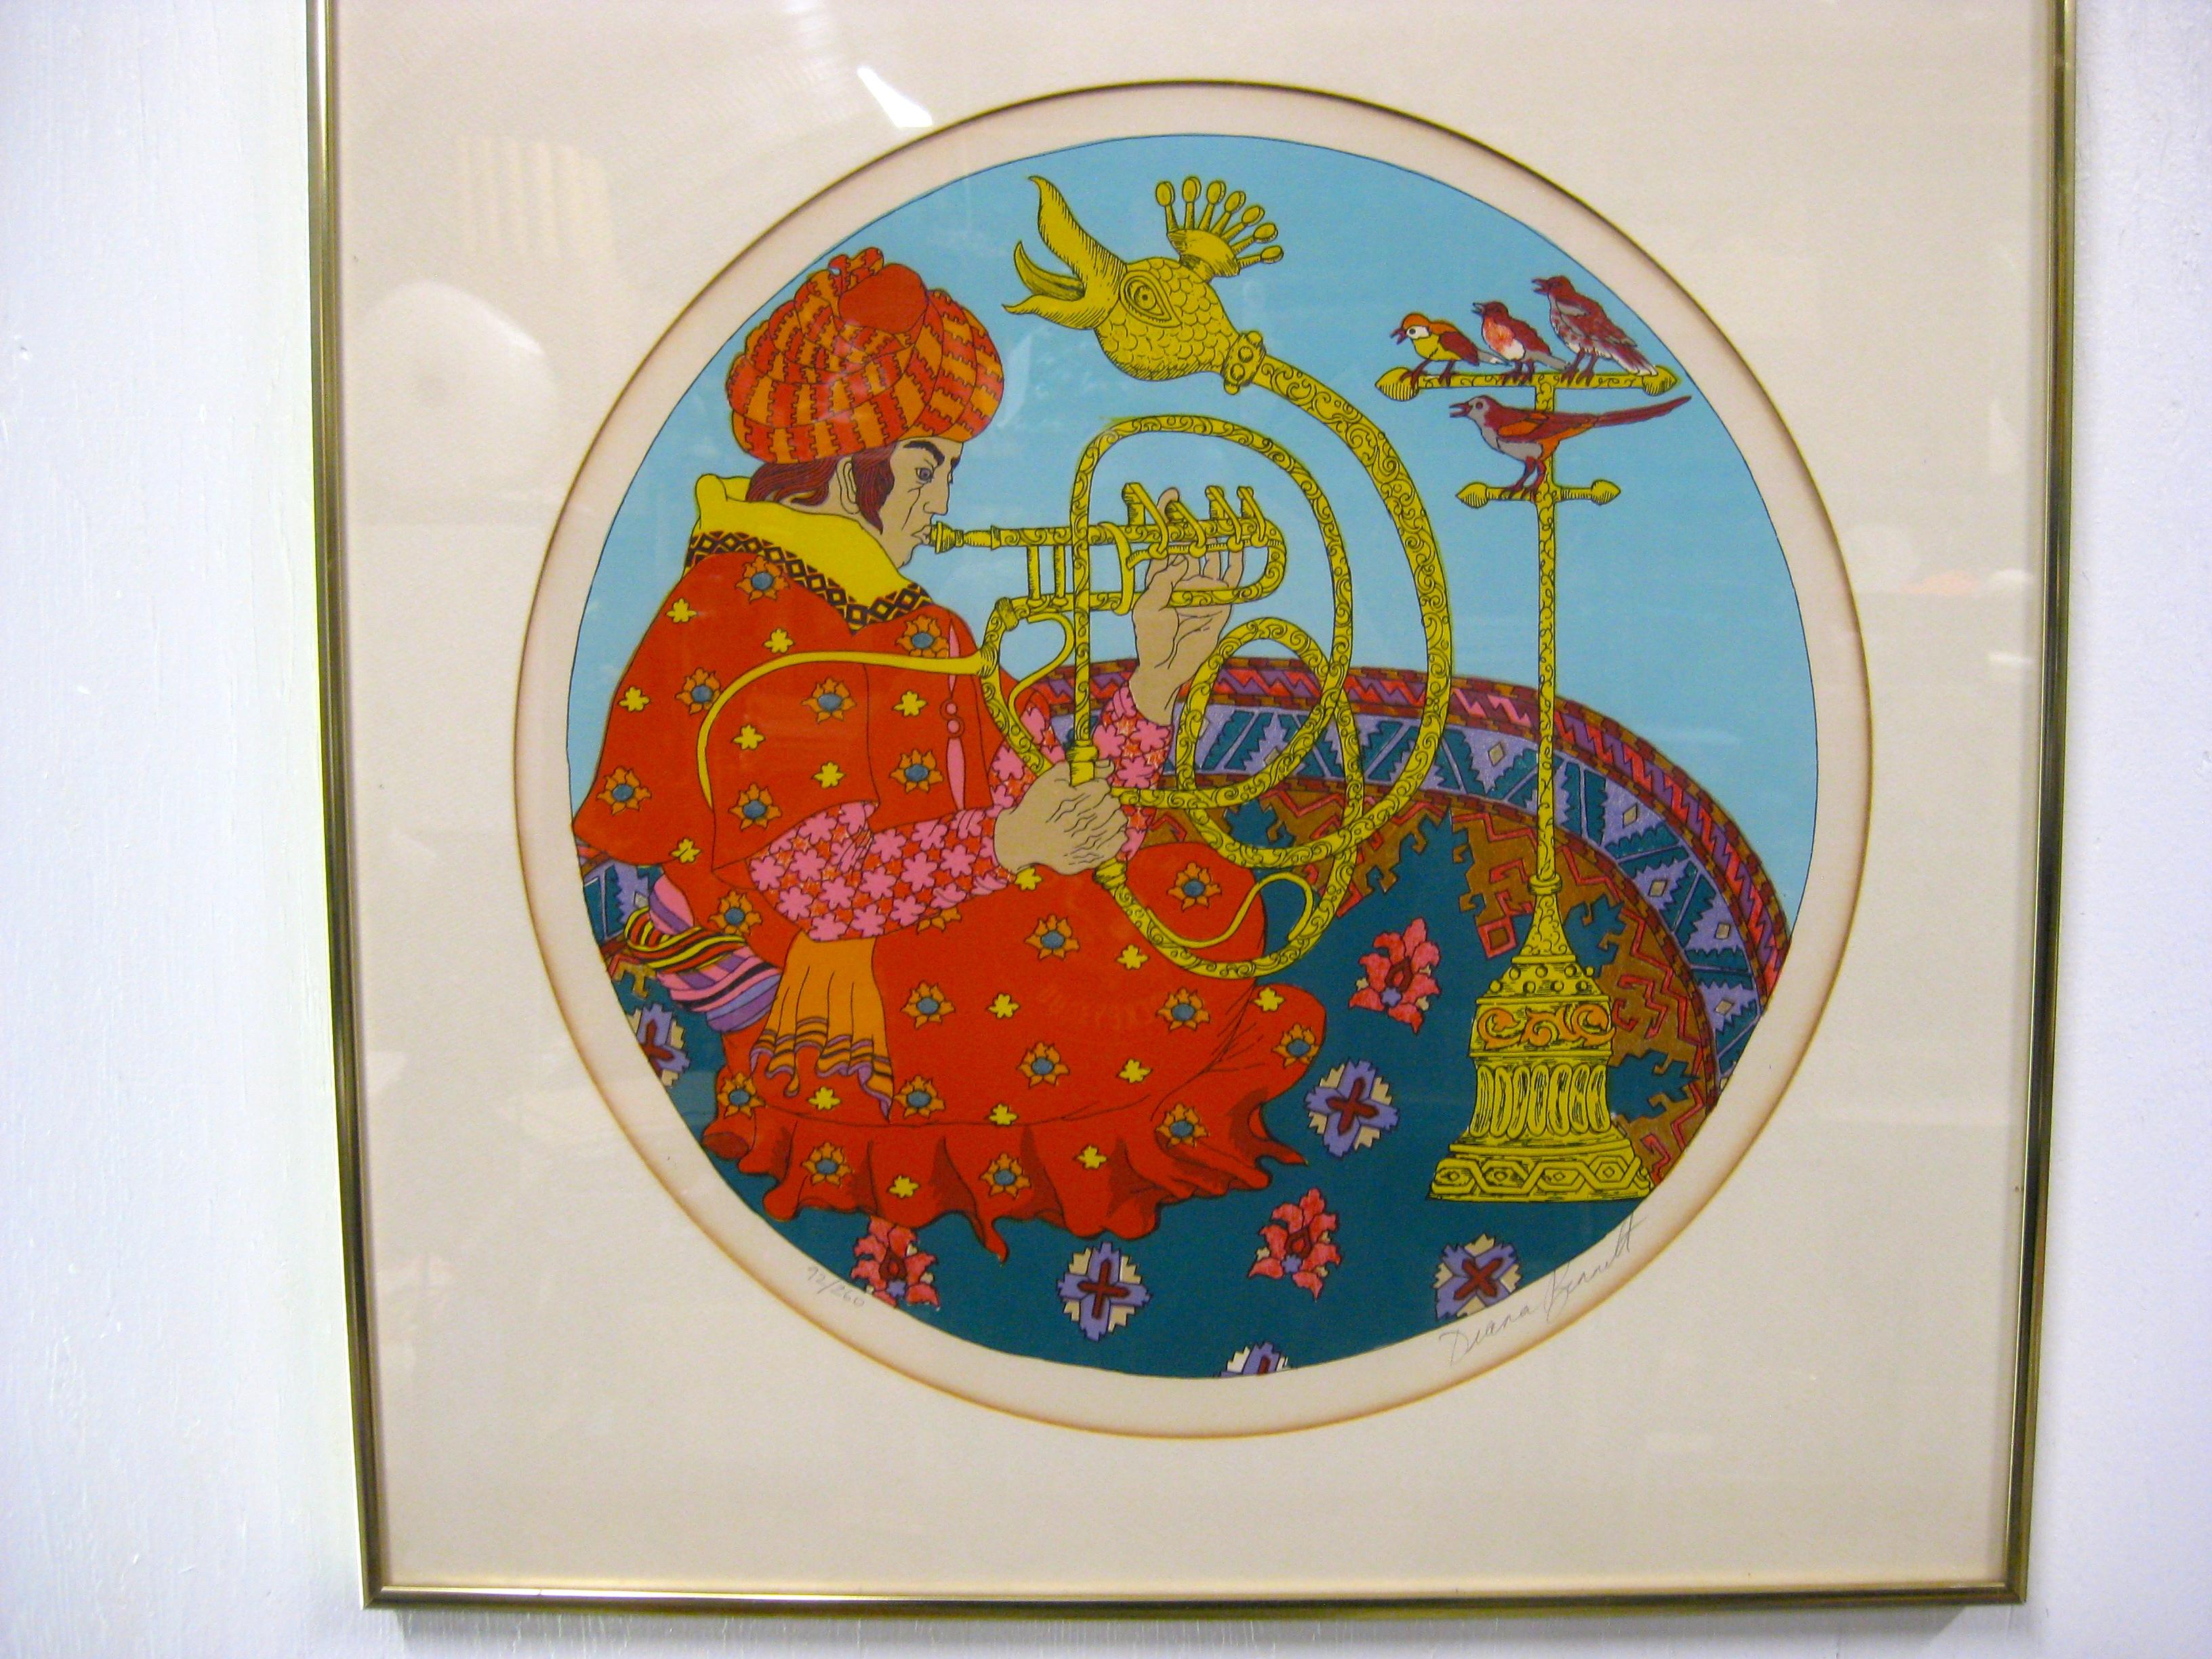 Wonderful whimsical pop art lithograph by Diana Bennett, circa 19570's. This is a hand signed and numbered lithograph. The lithograph is number 92 of 260. Comes in the original frame and under clear plastic. In very nice original condition. Frame is